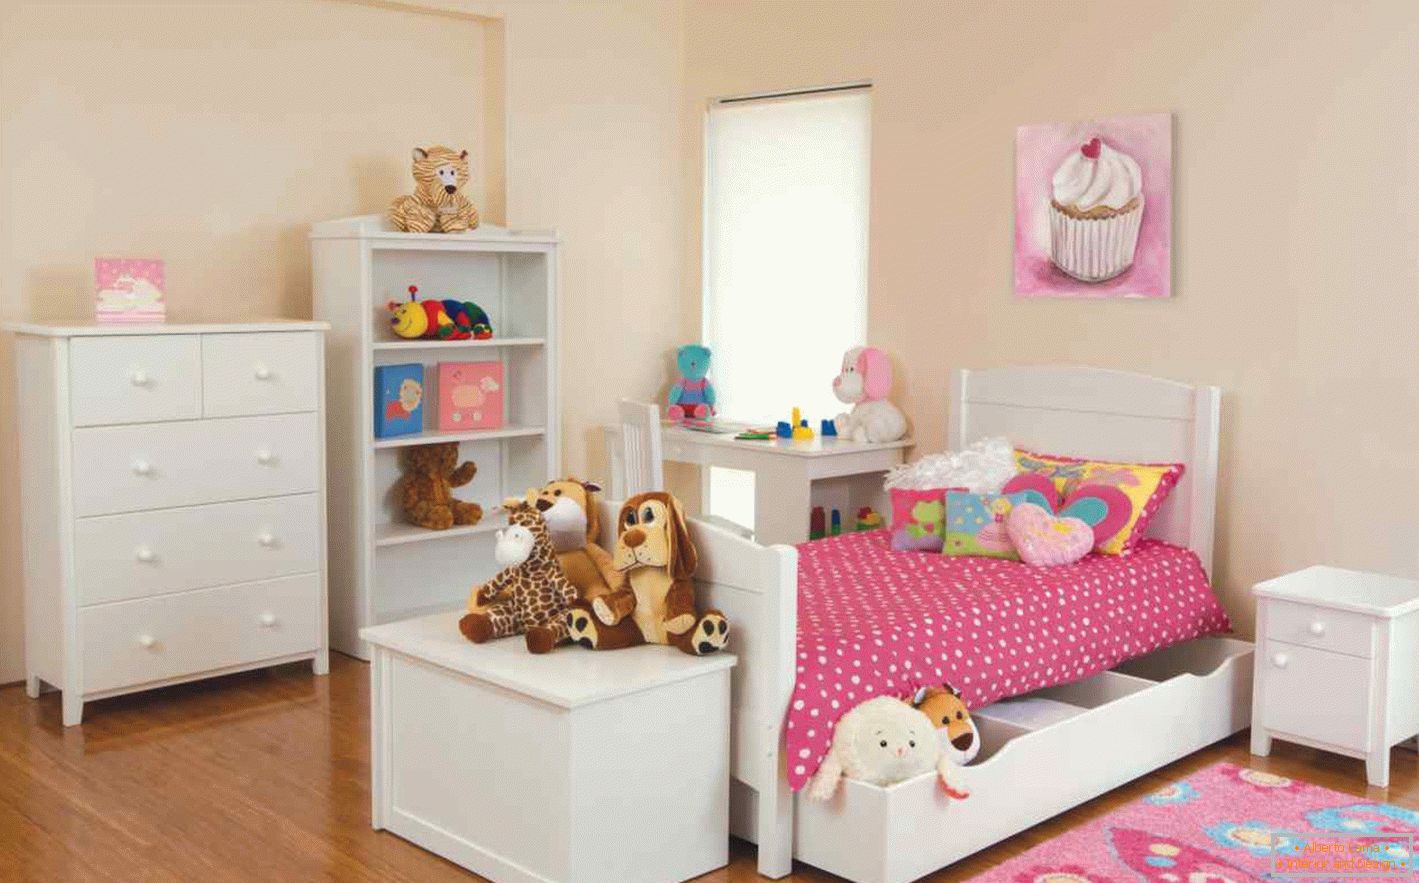 Set of furniture for the girl's room